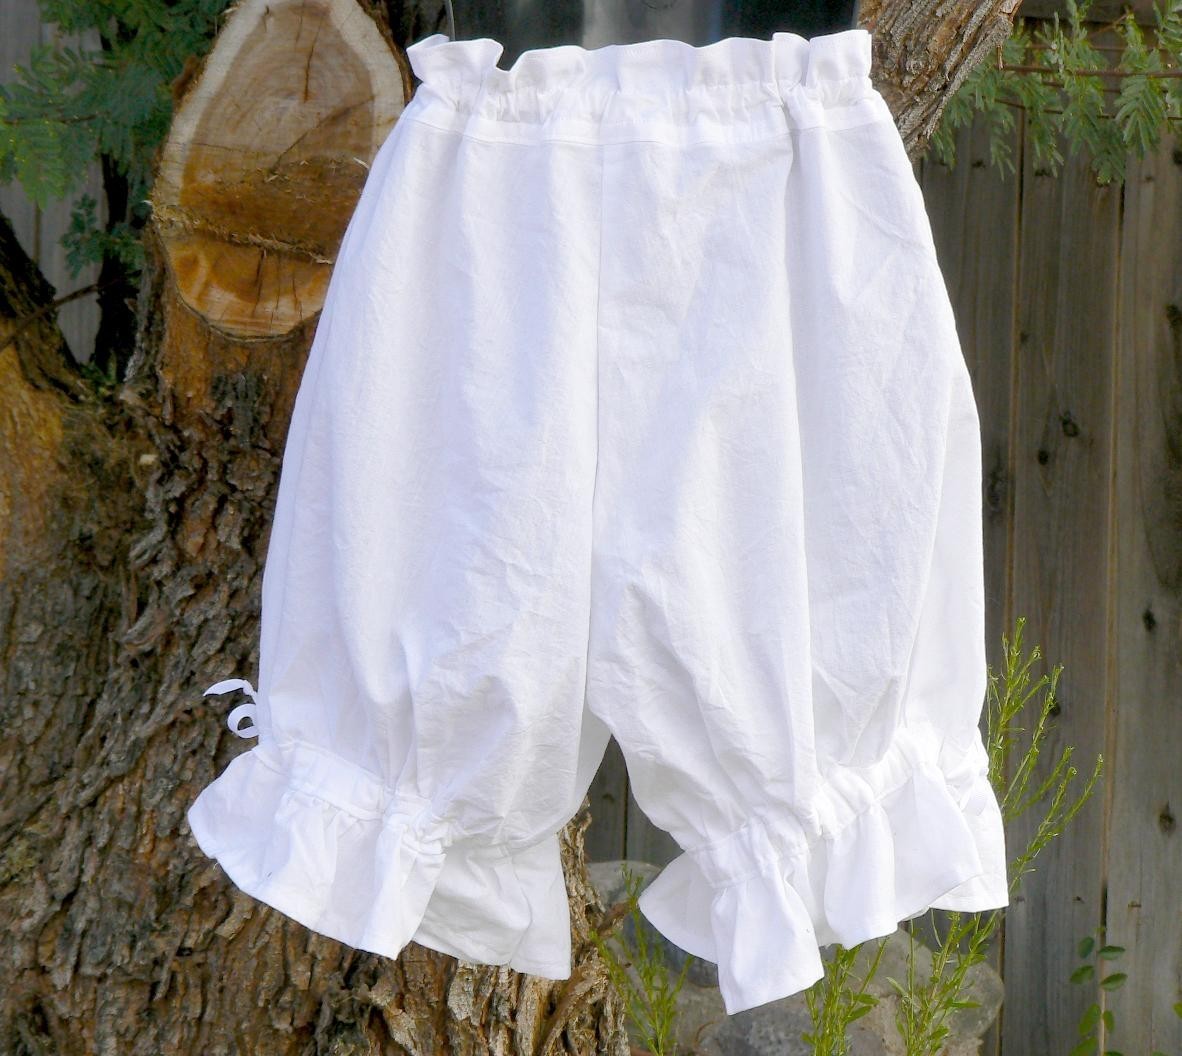 Cotton Bloomers Short - Costumes, Reenactment, Theater